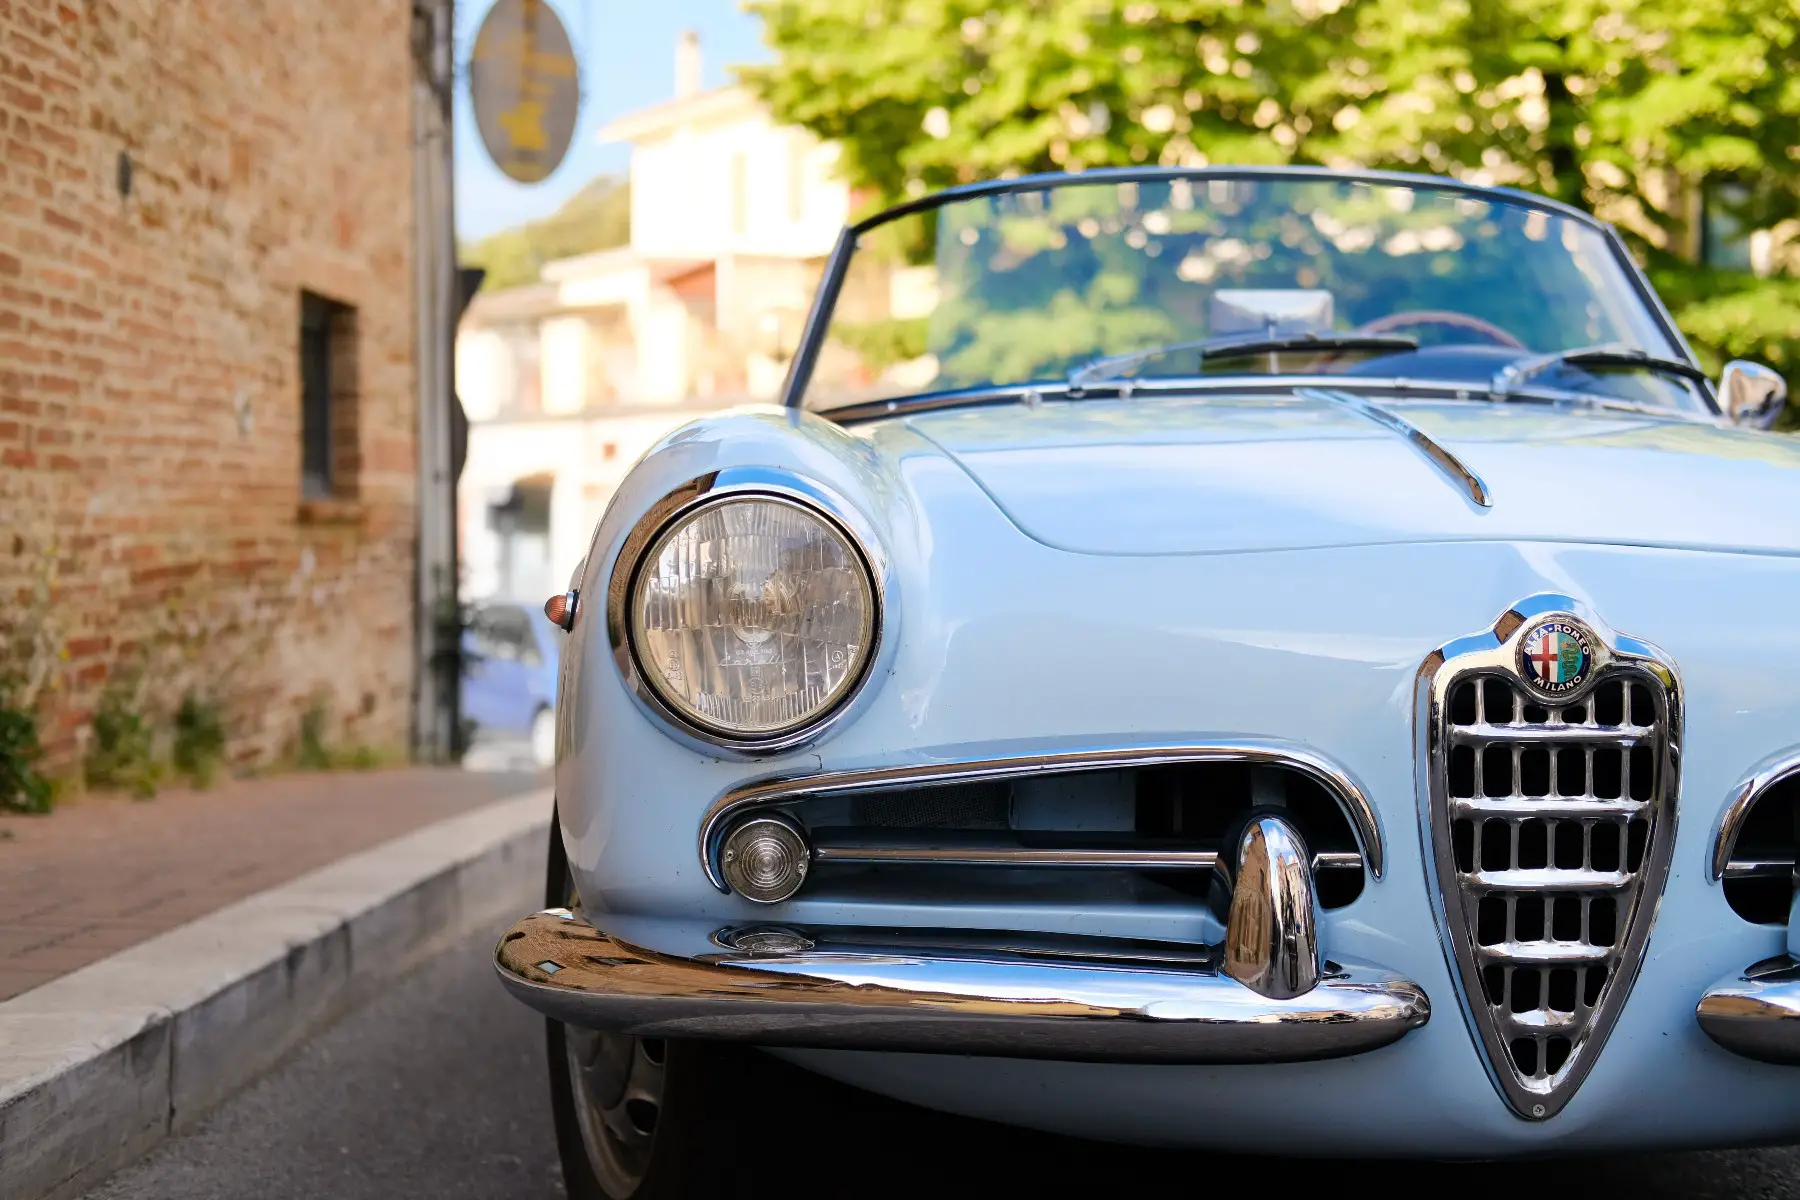 A close up shot of a blue Alfa Romeo parked in a street in Italy